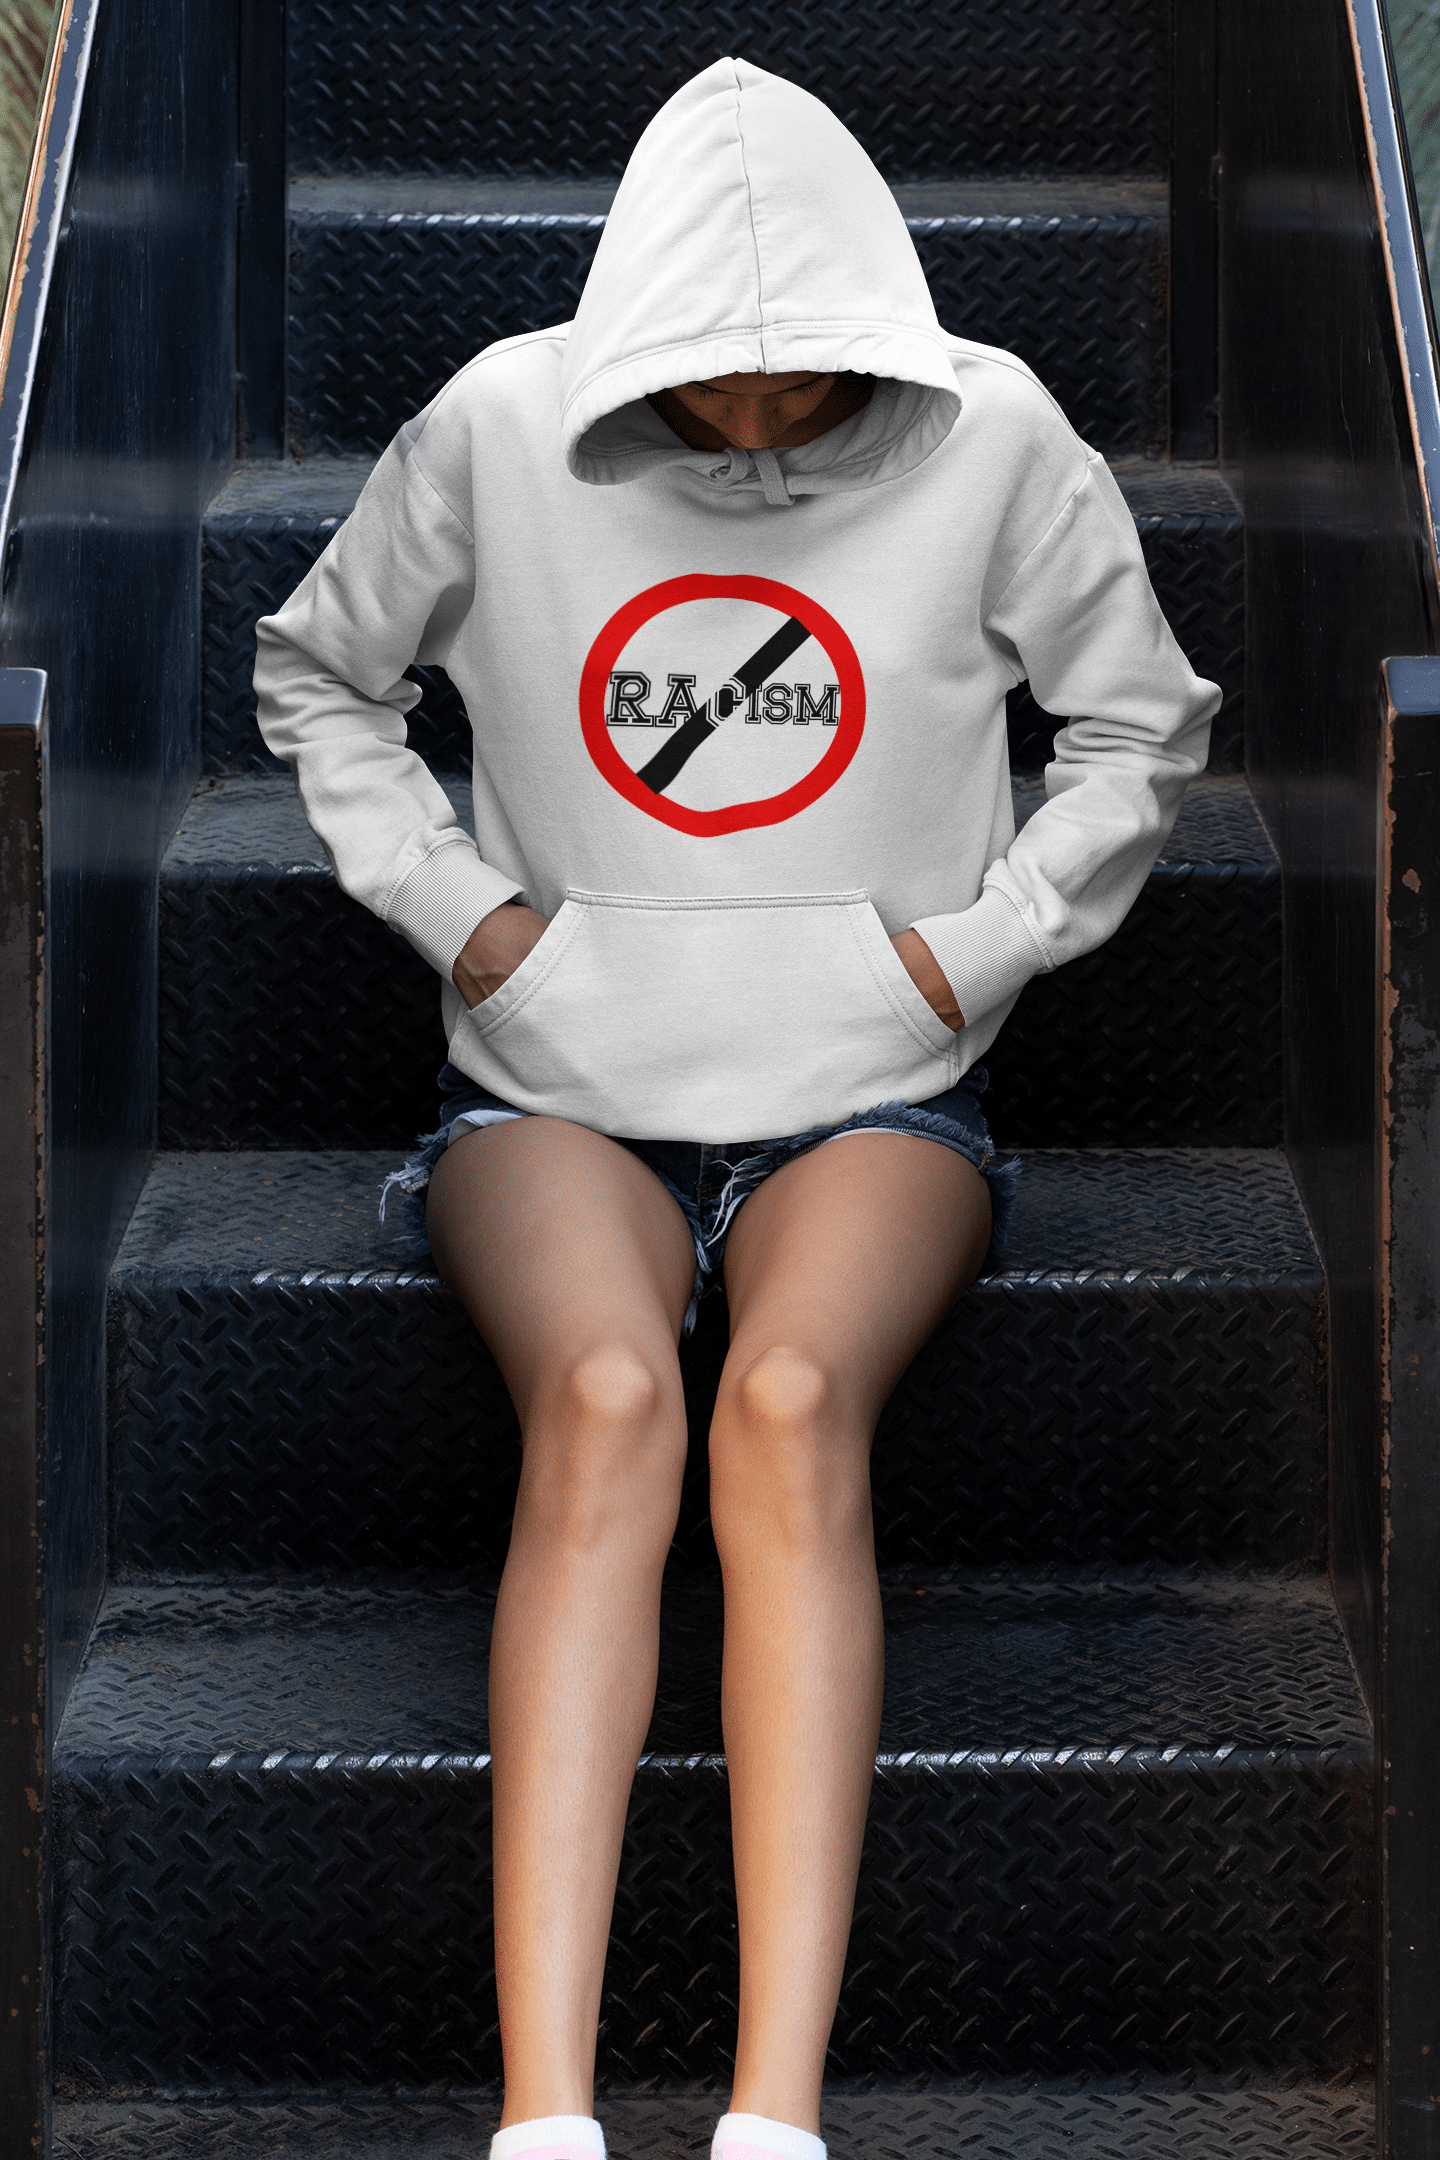 A person sitting on some steps wearing shorts and a hoodie